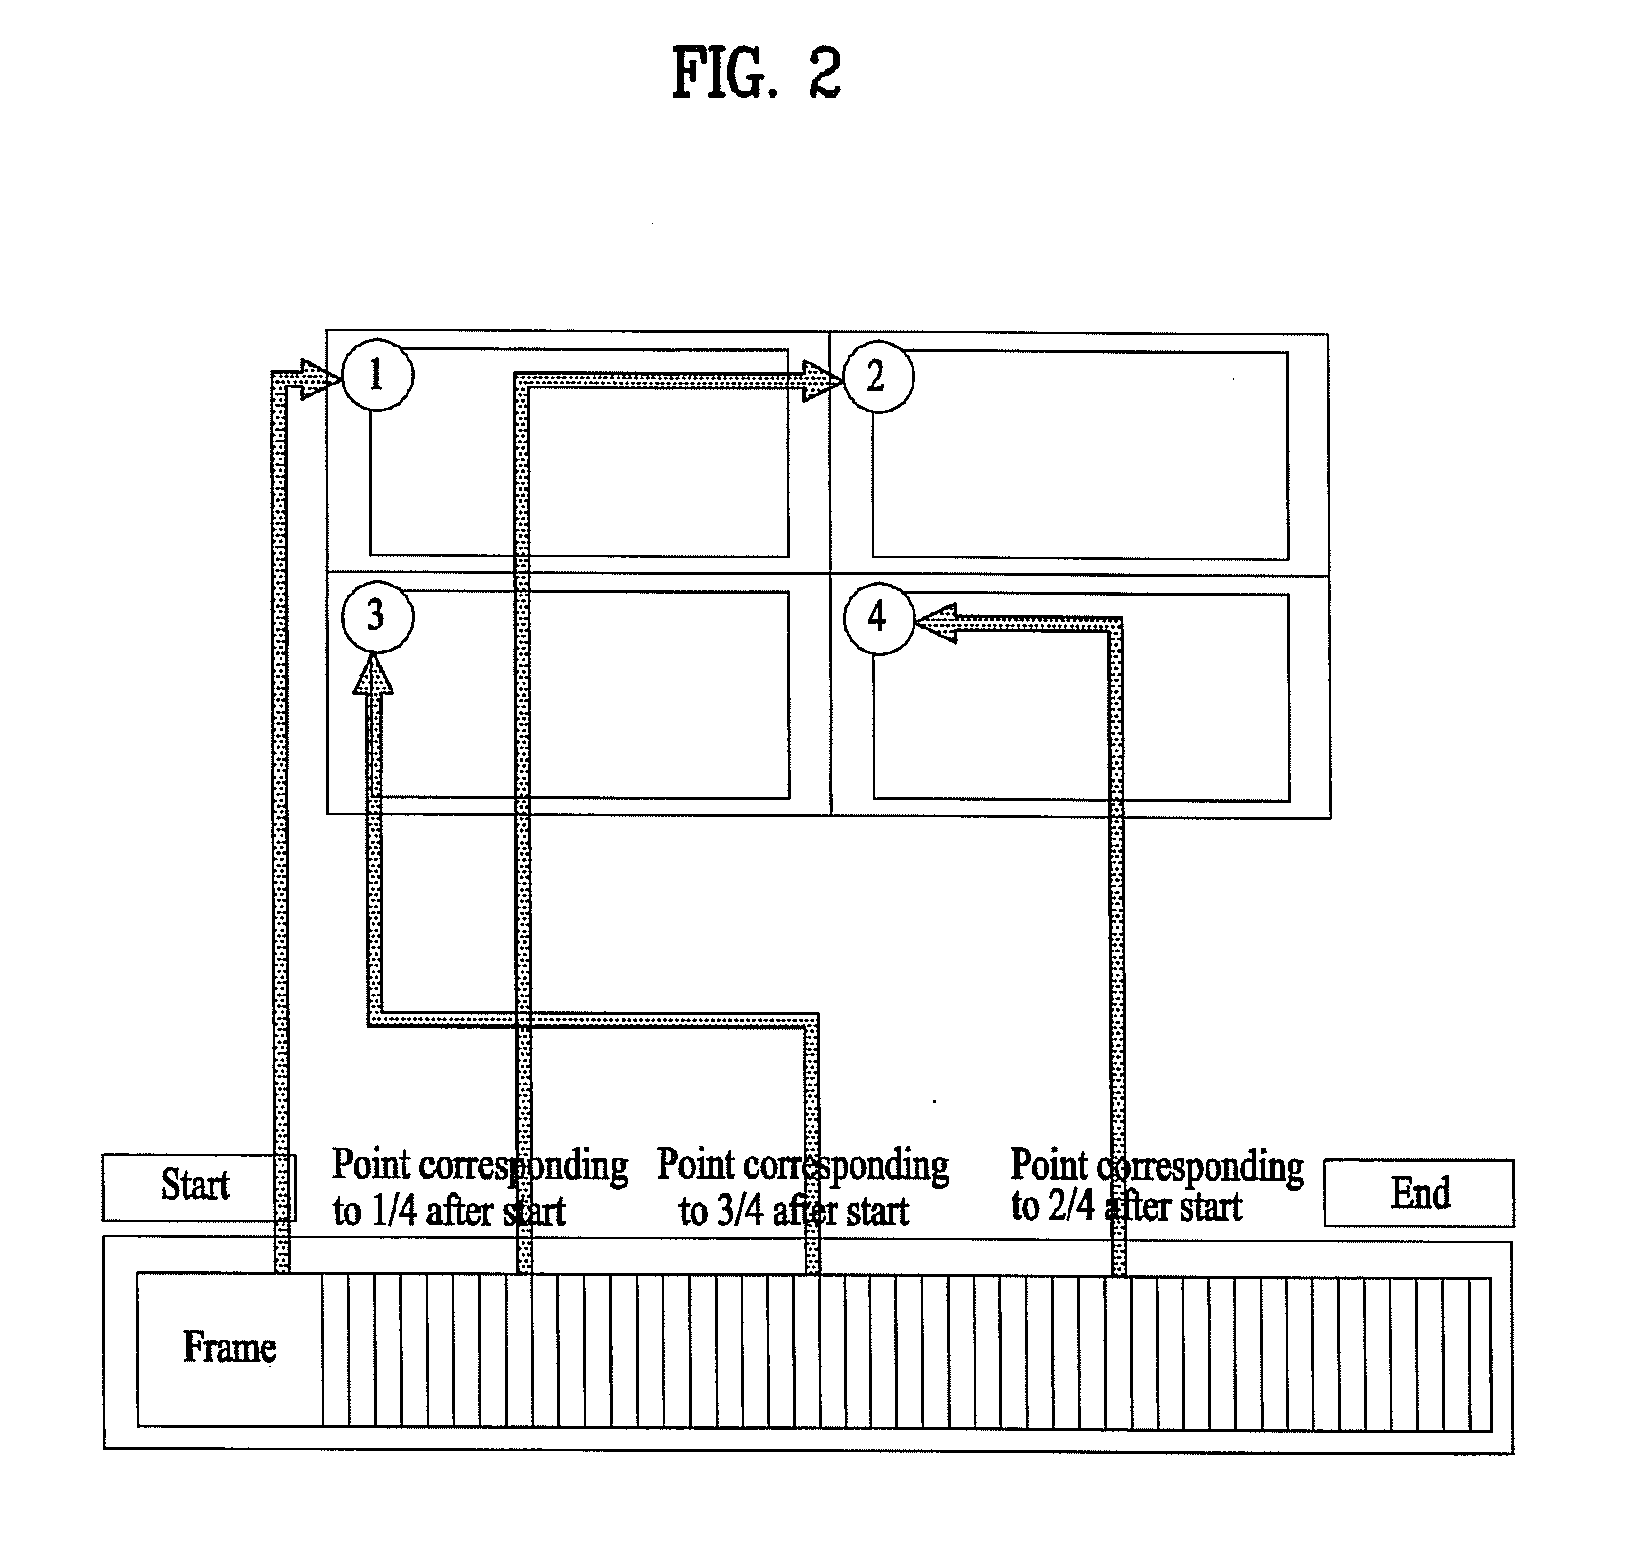 Display device for having a function of searching a divided screen, and the method for controlling the same